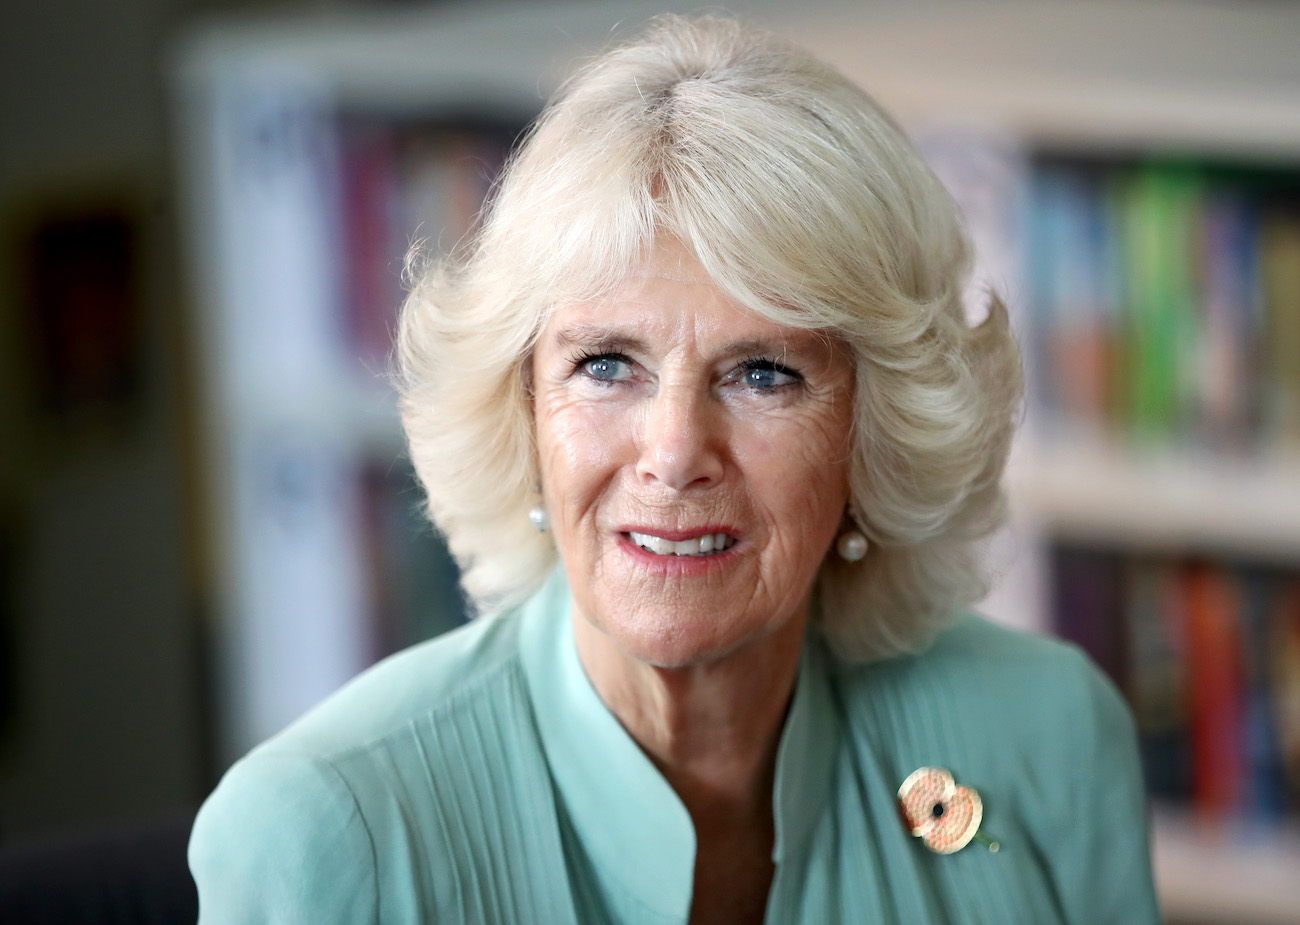 Camilla Parker Bowles looking on while wearing a teal outfit